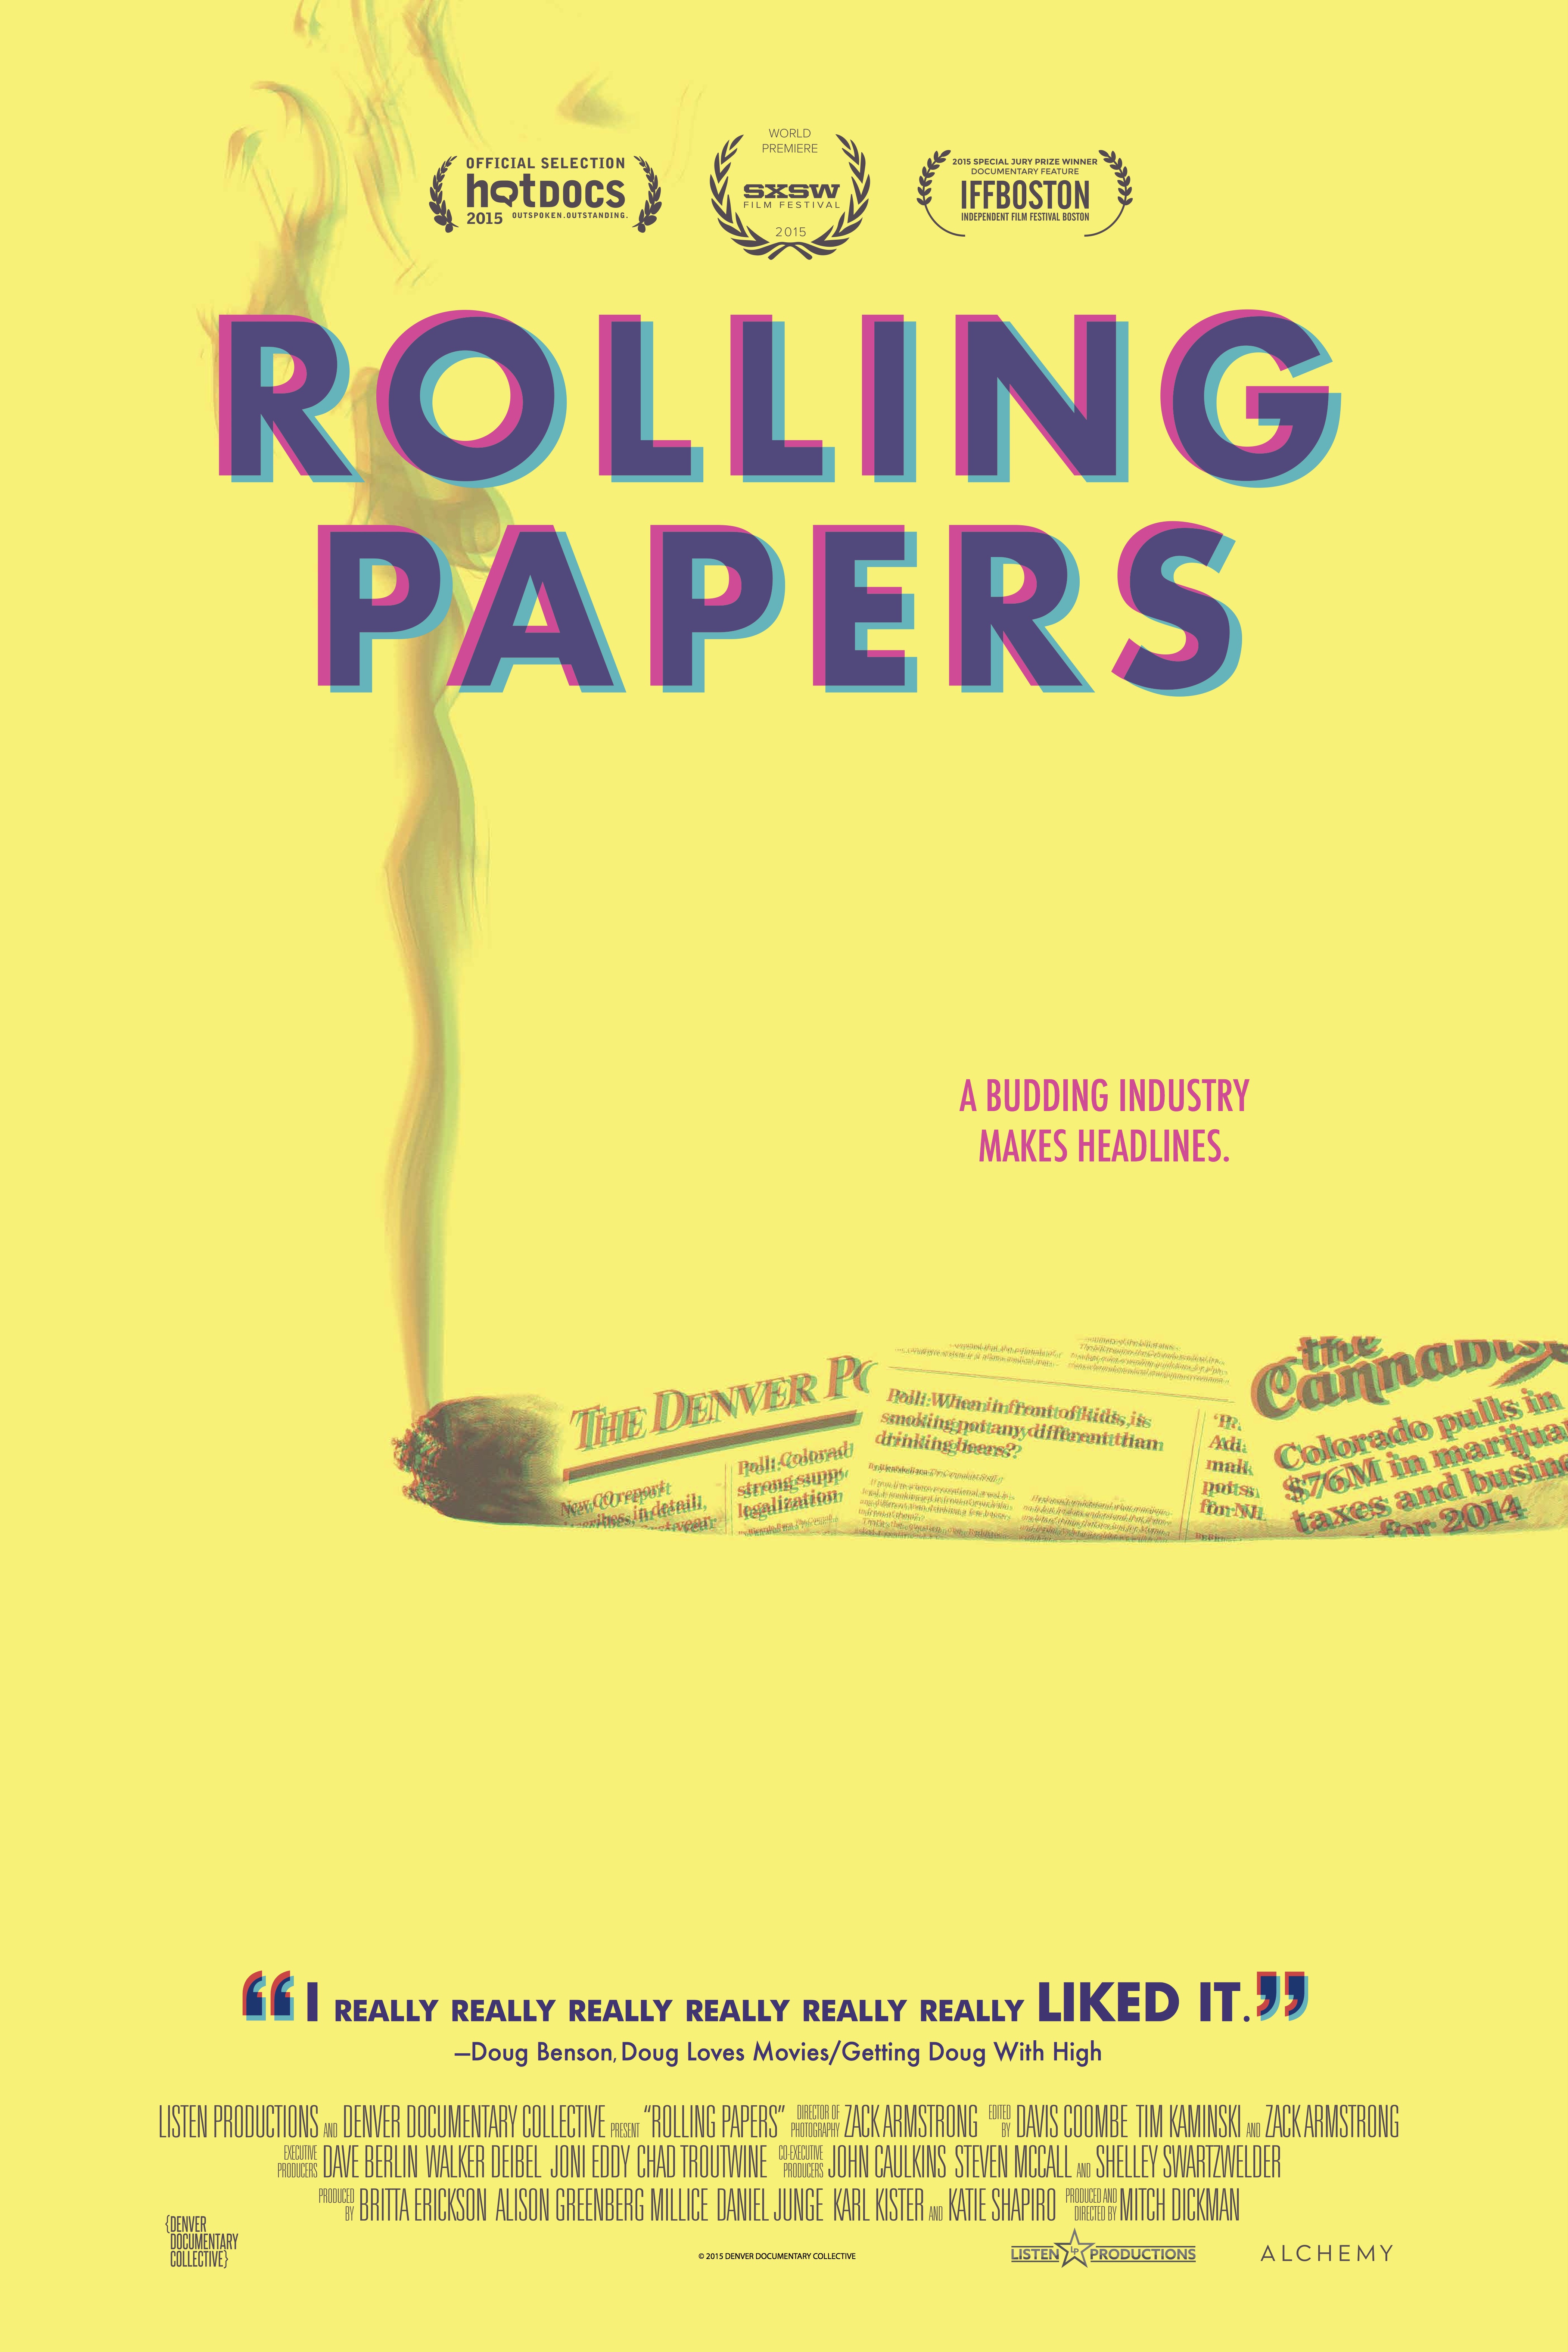 RollingPapers_1Sheet_sm